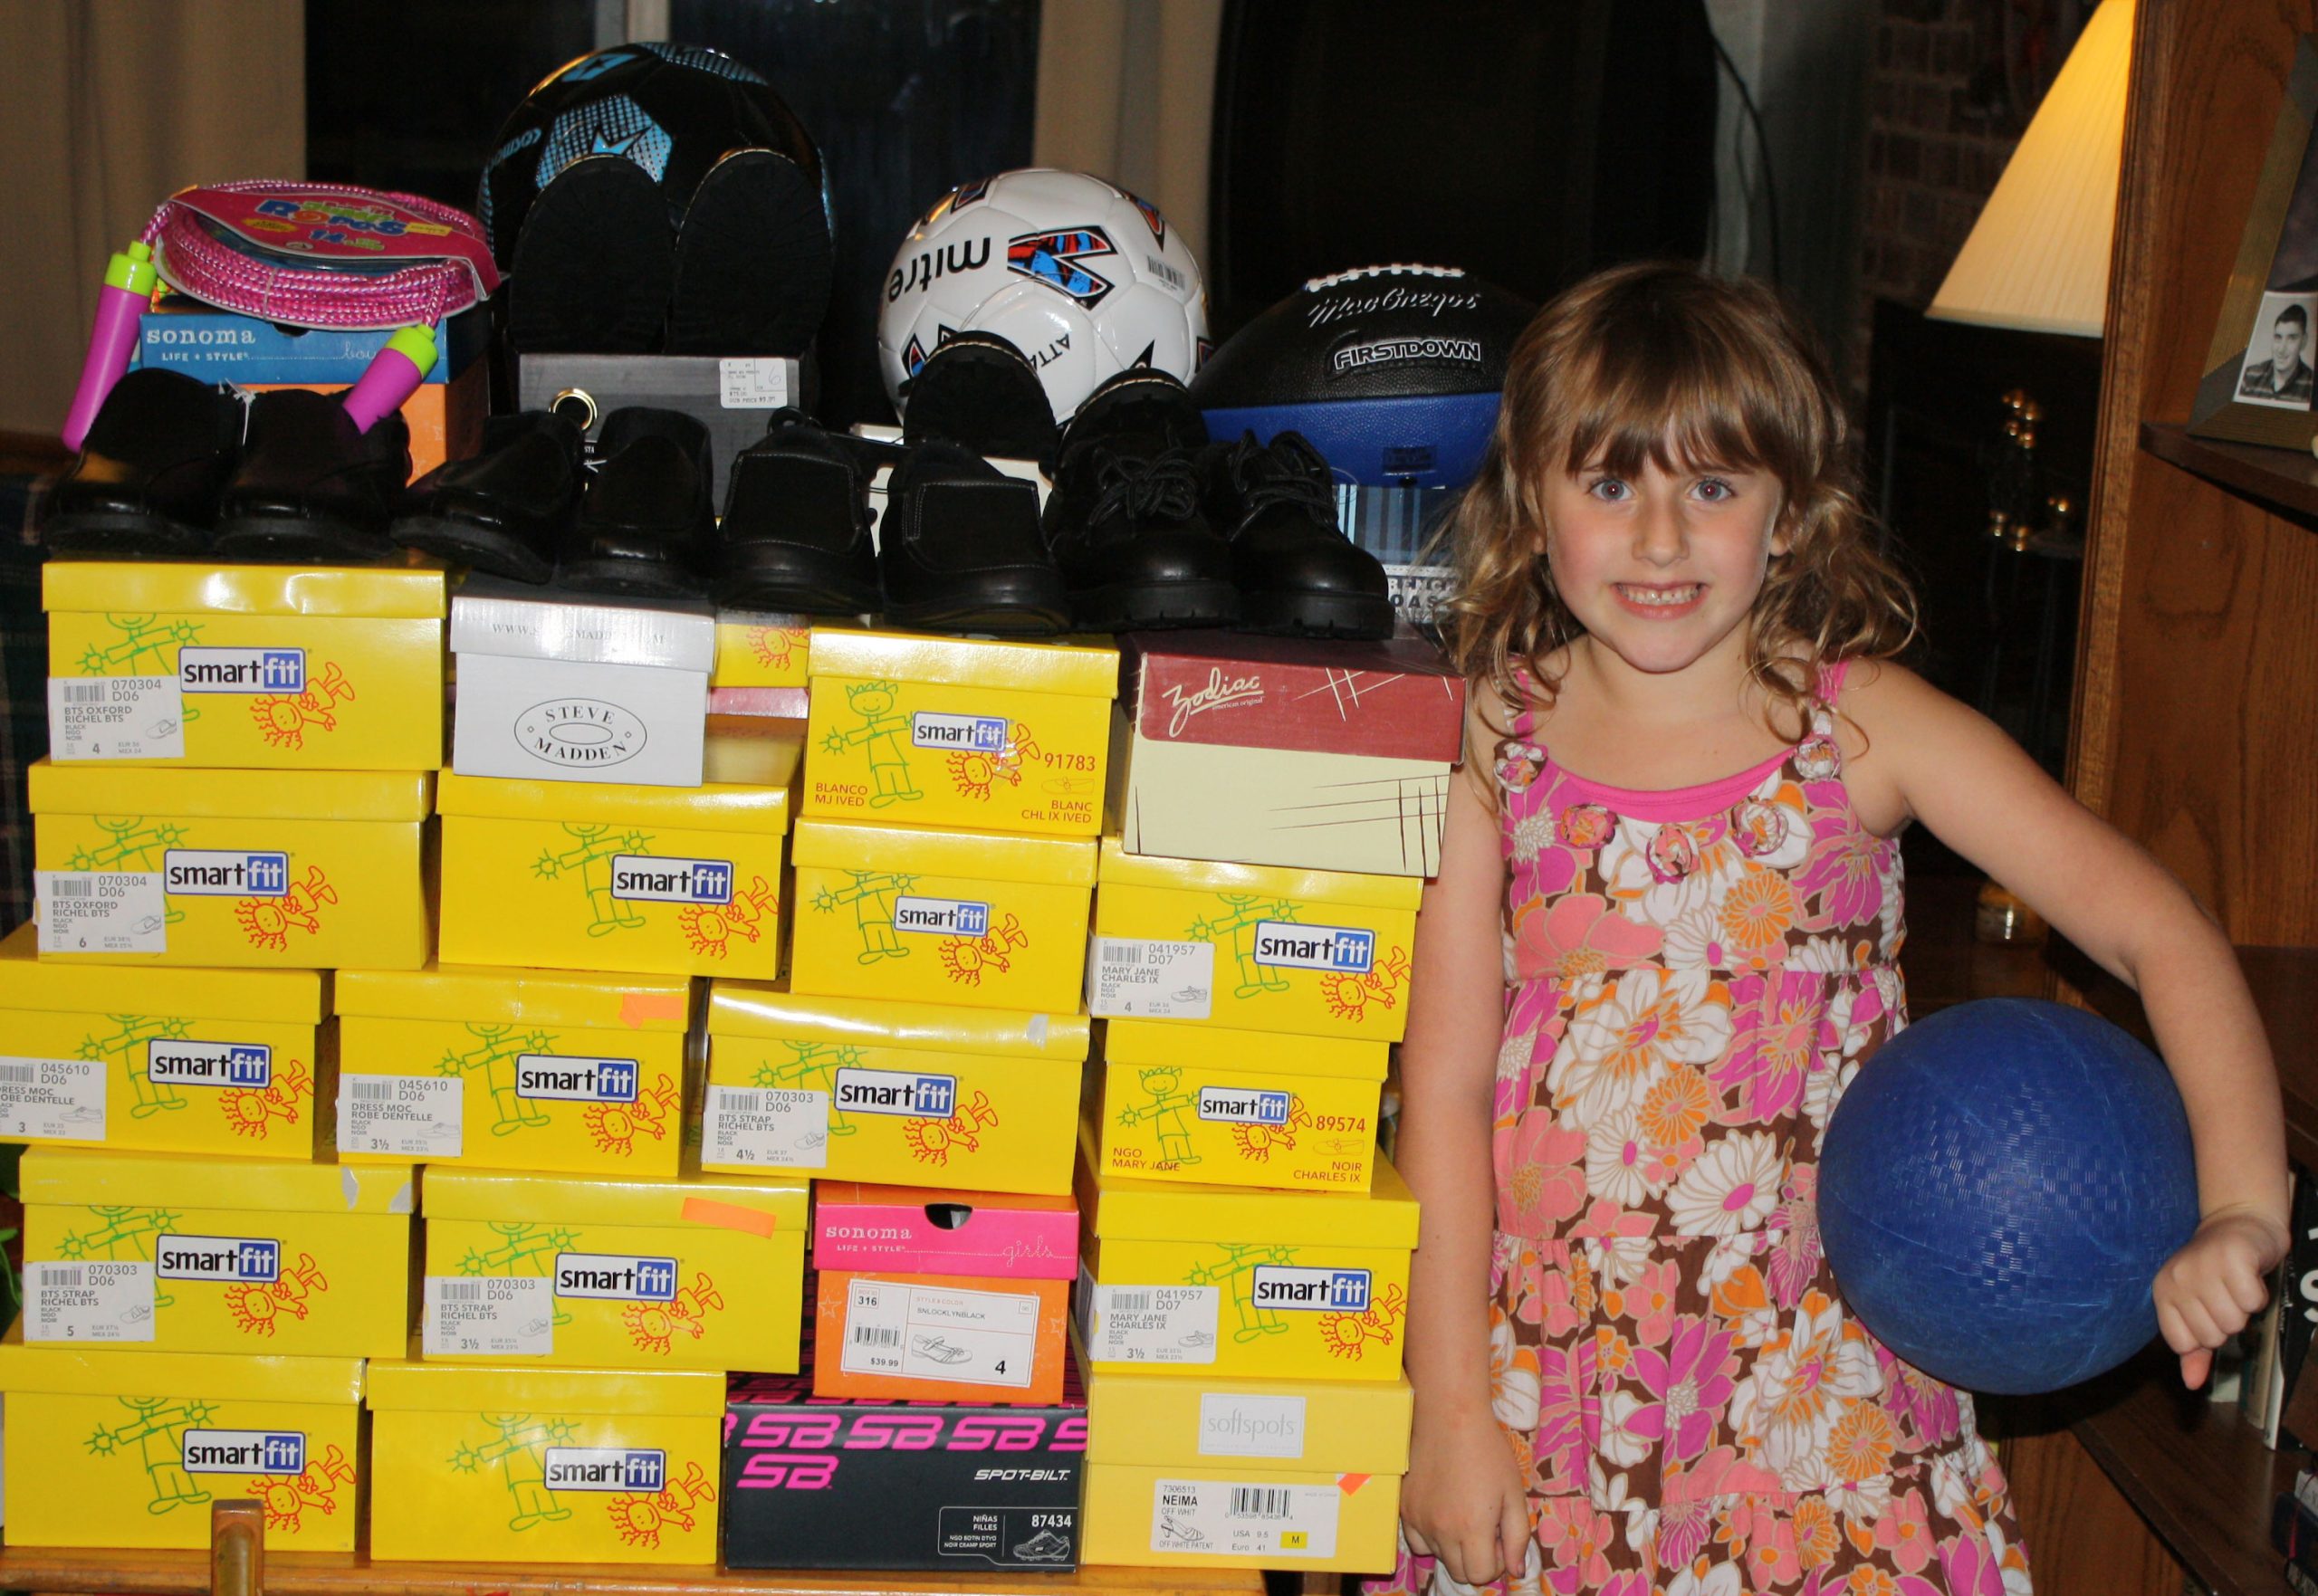 Pennsylvania Girl Collects Shoes, Sports Equipment for Orphans in Guyana